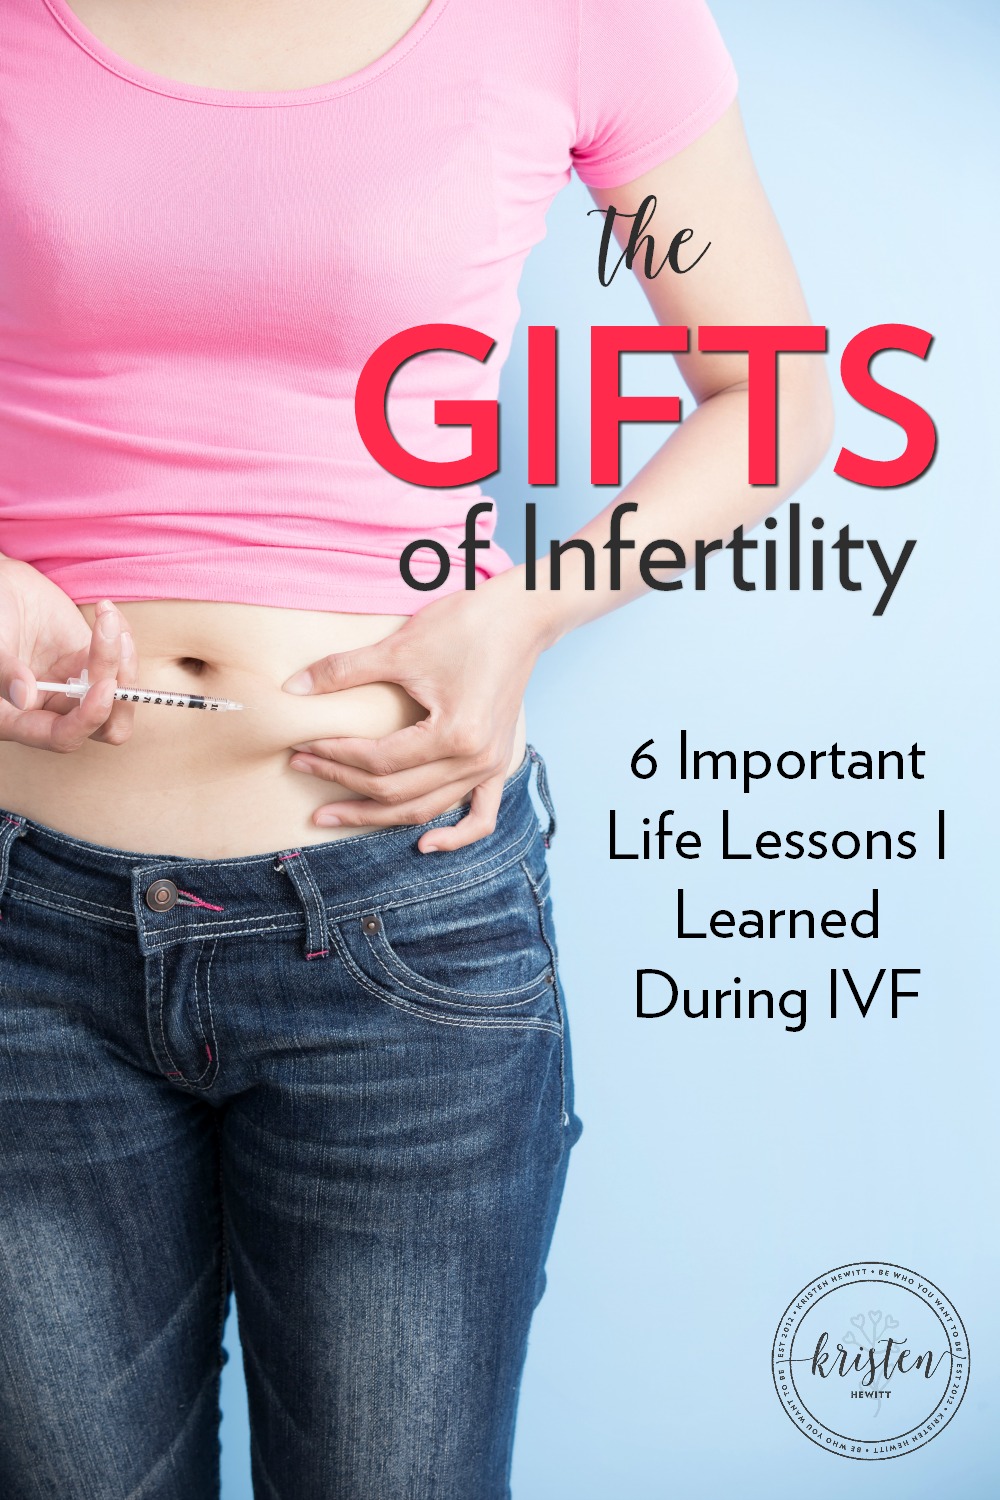 Have you struggled with infertility? The heartbreak of not being able to conceive is so incredibly difficult, but as with anything in life we can always find a gift. Read about the 6 important life lessons I learned while battling infertility for seven years. 